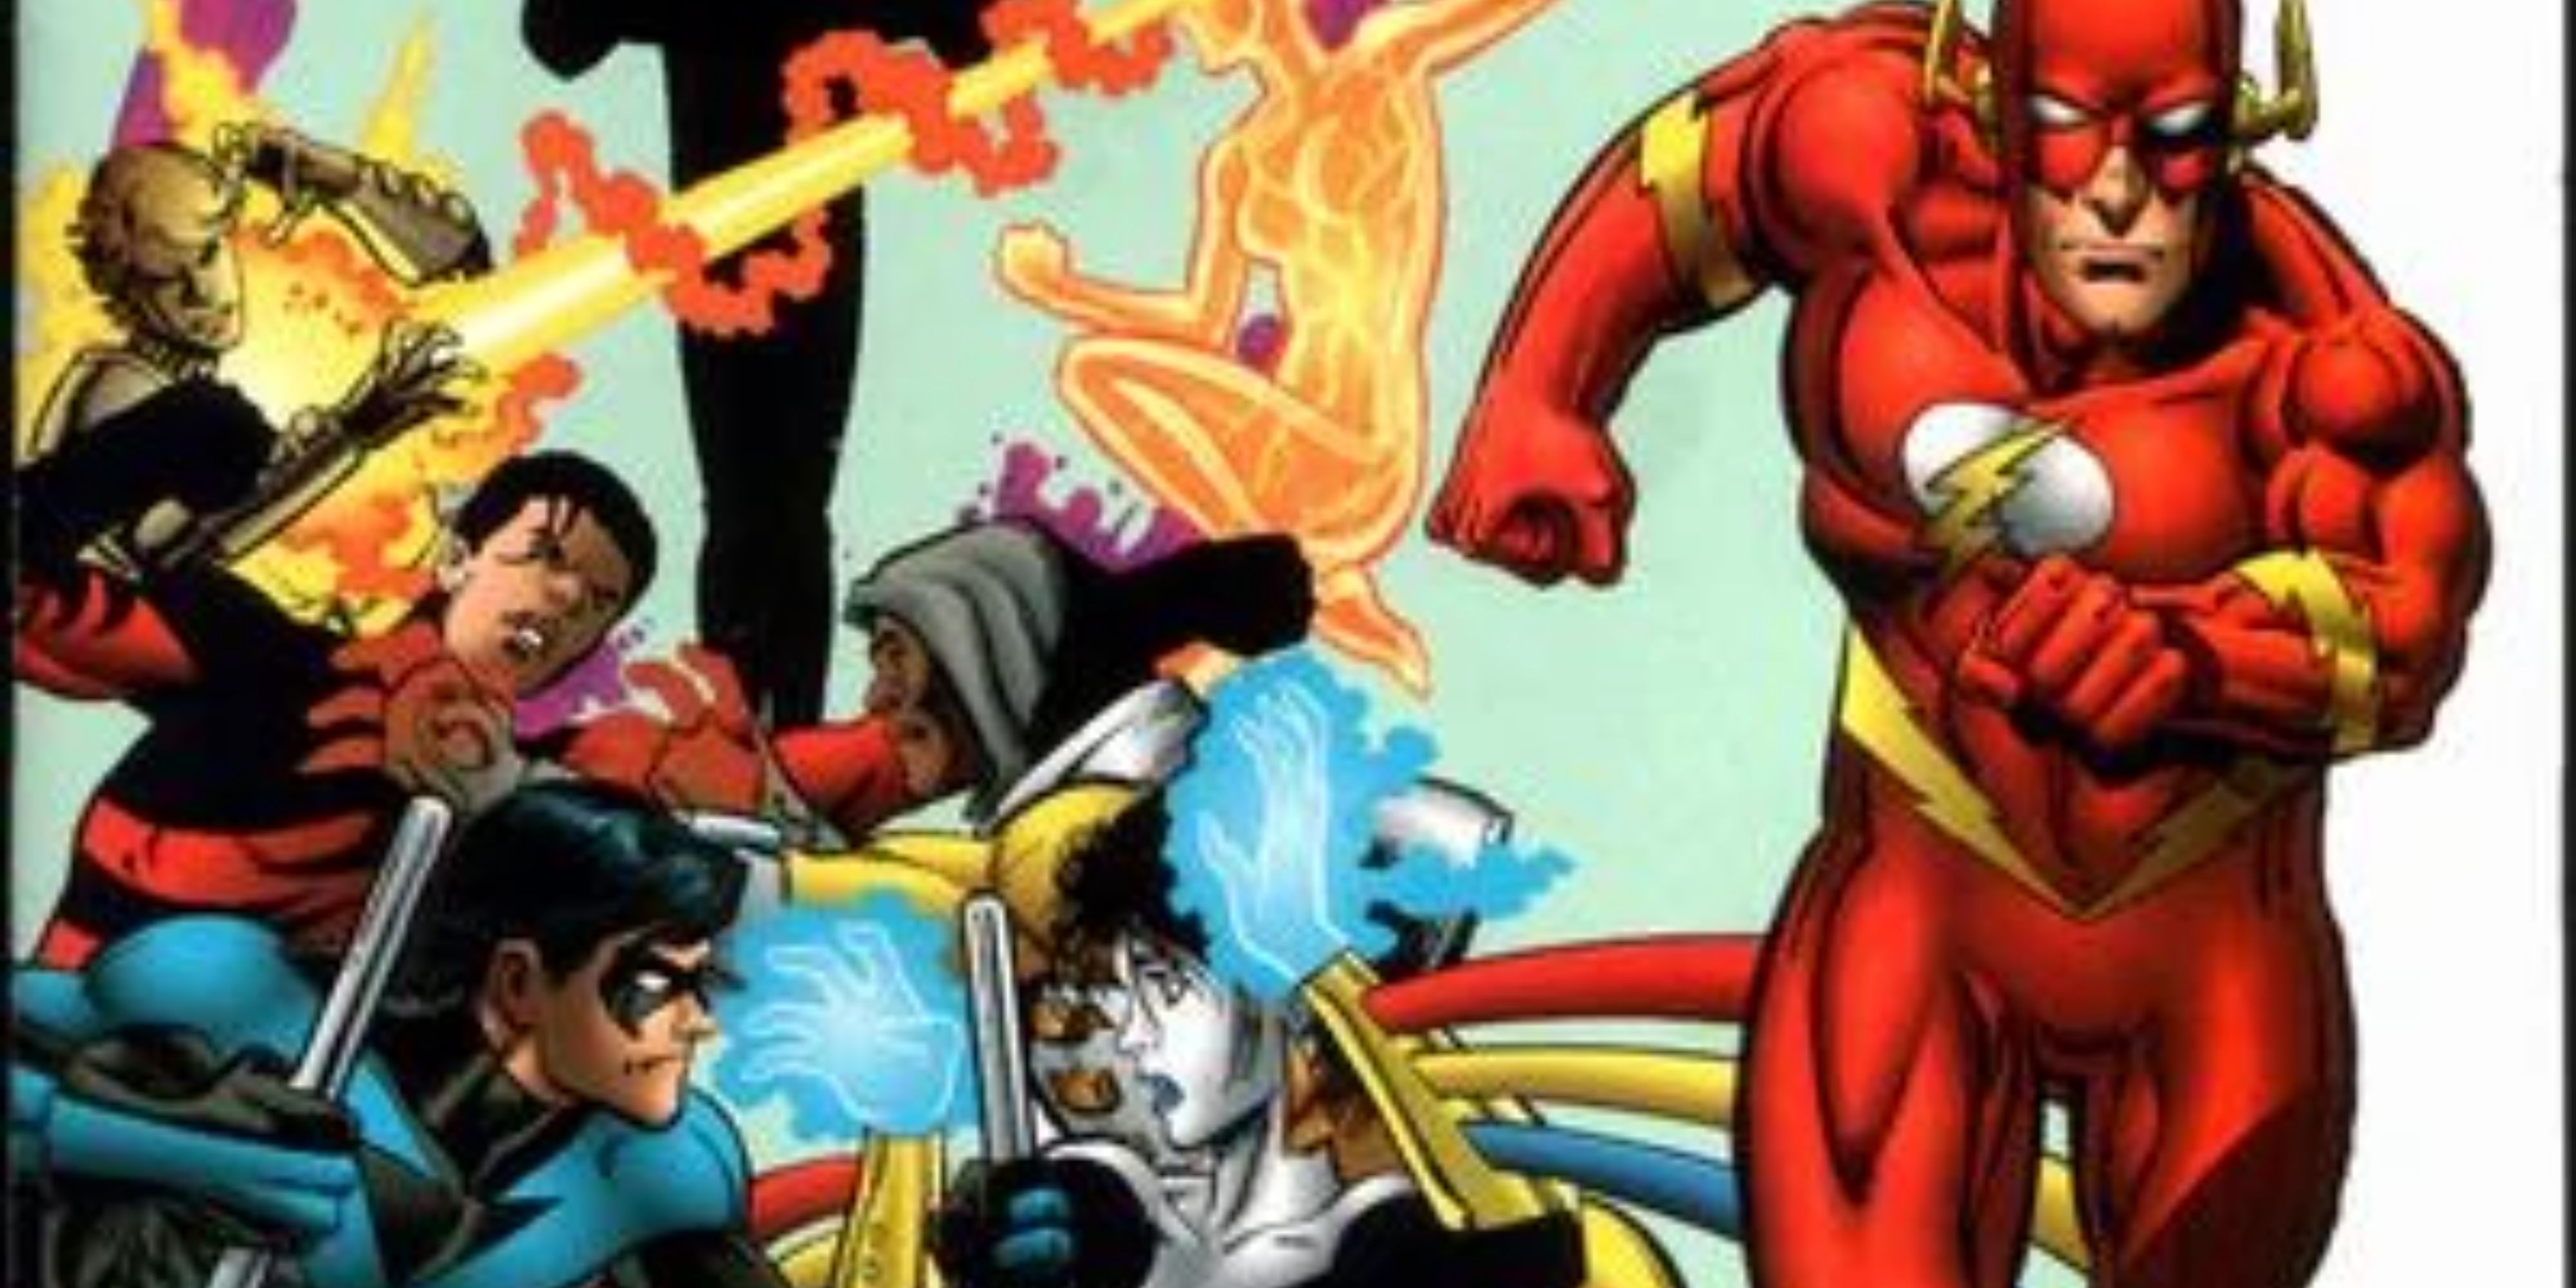 The Teen Titans (lead by The Atom) fight the original Titans.